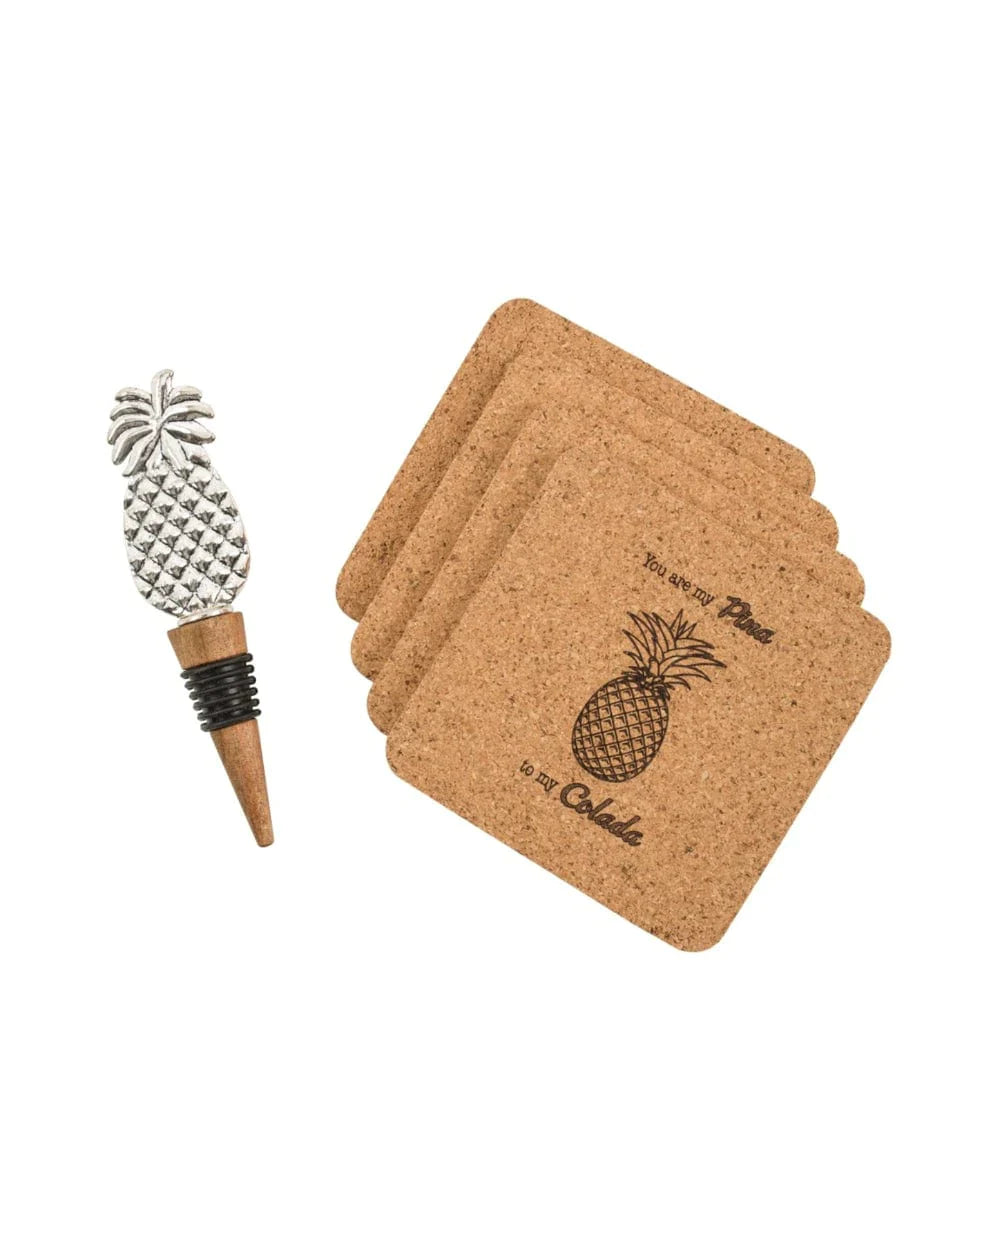 Pineapple Party Gift Set With 4 Coasters And A Wine Stopper - Chumbak